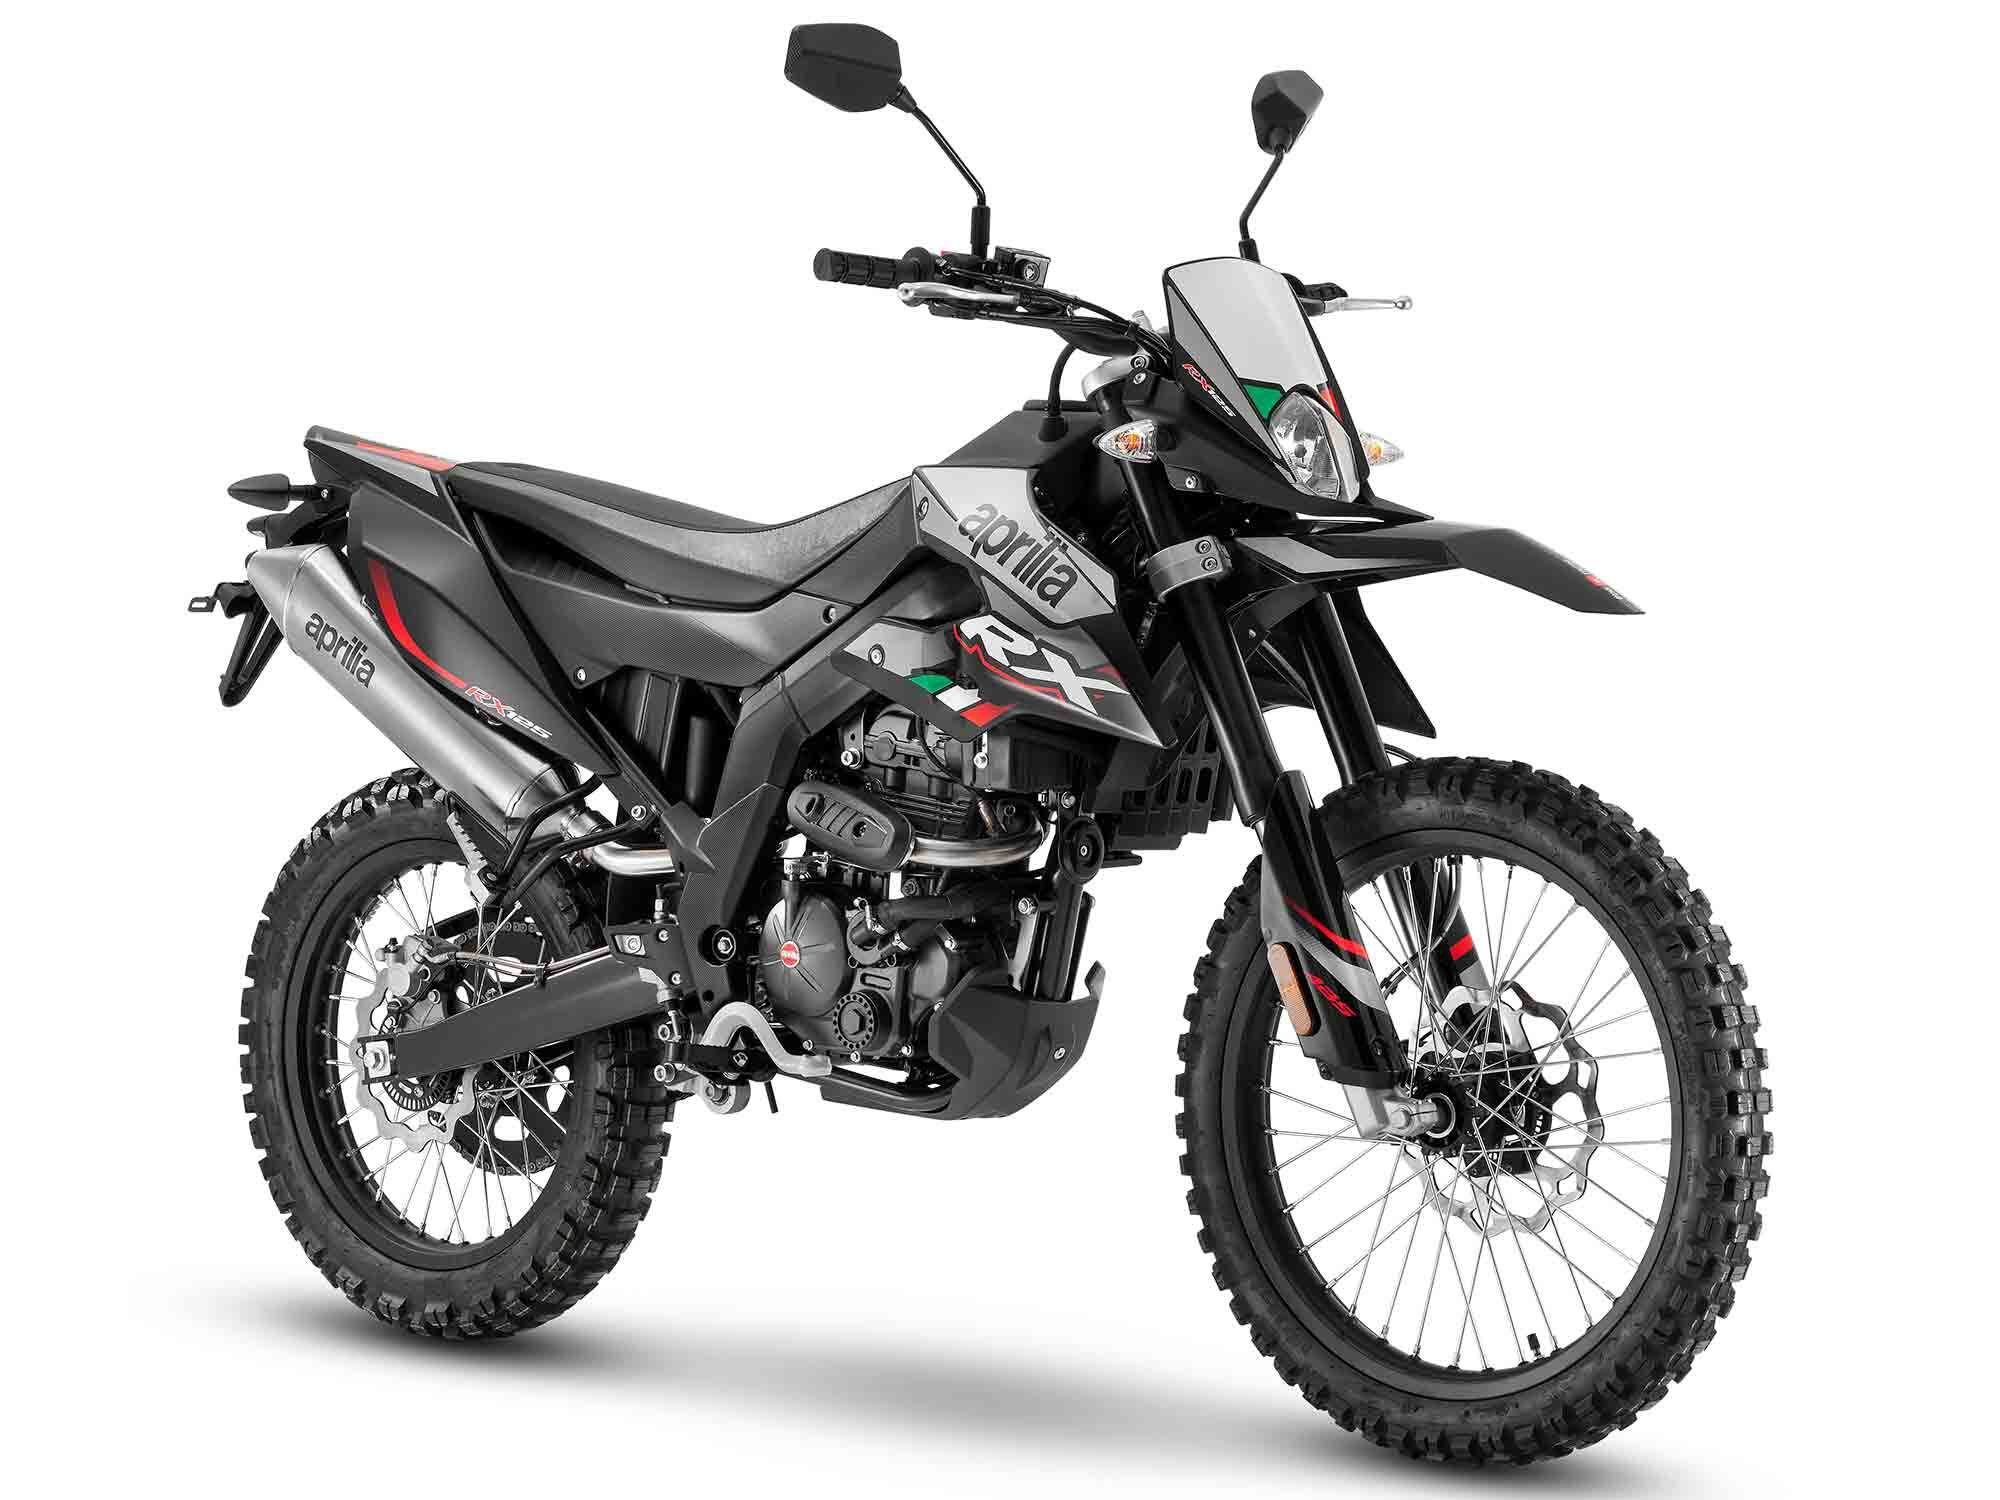 With a 21-inch front wheel and 18-inch rear, the RX 125 is a proper, full-size dirt ripper, despite its diminutive powerplant.